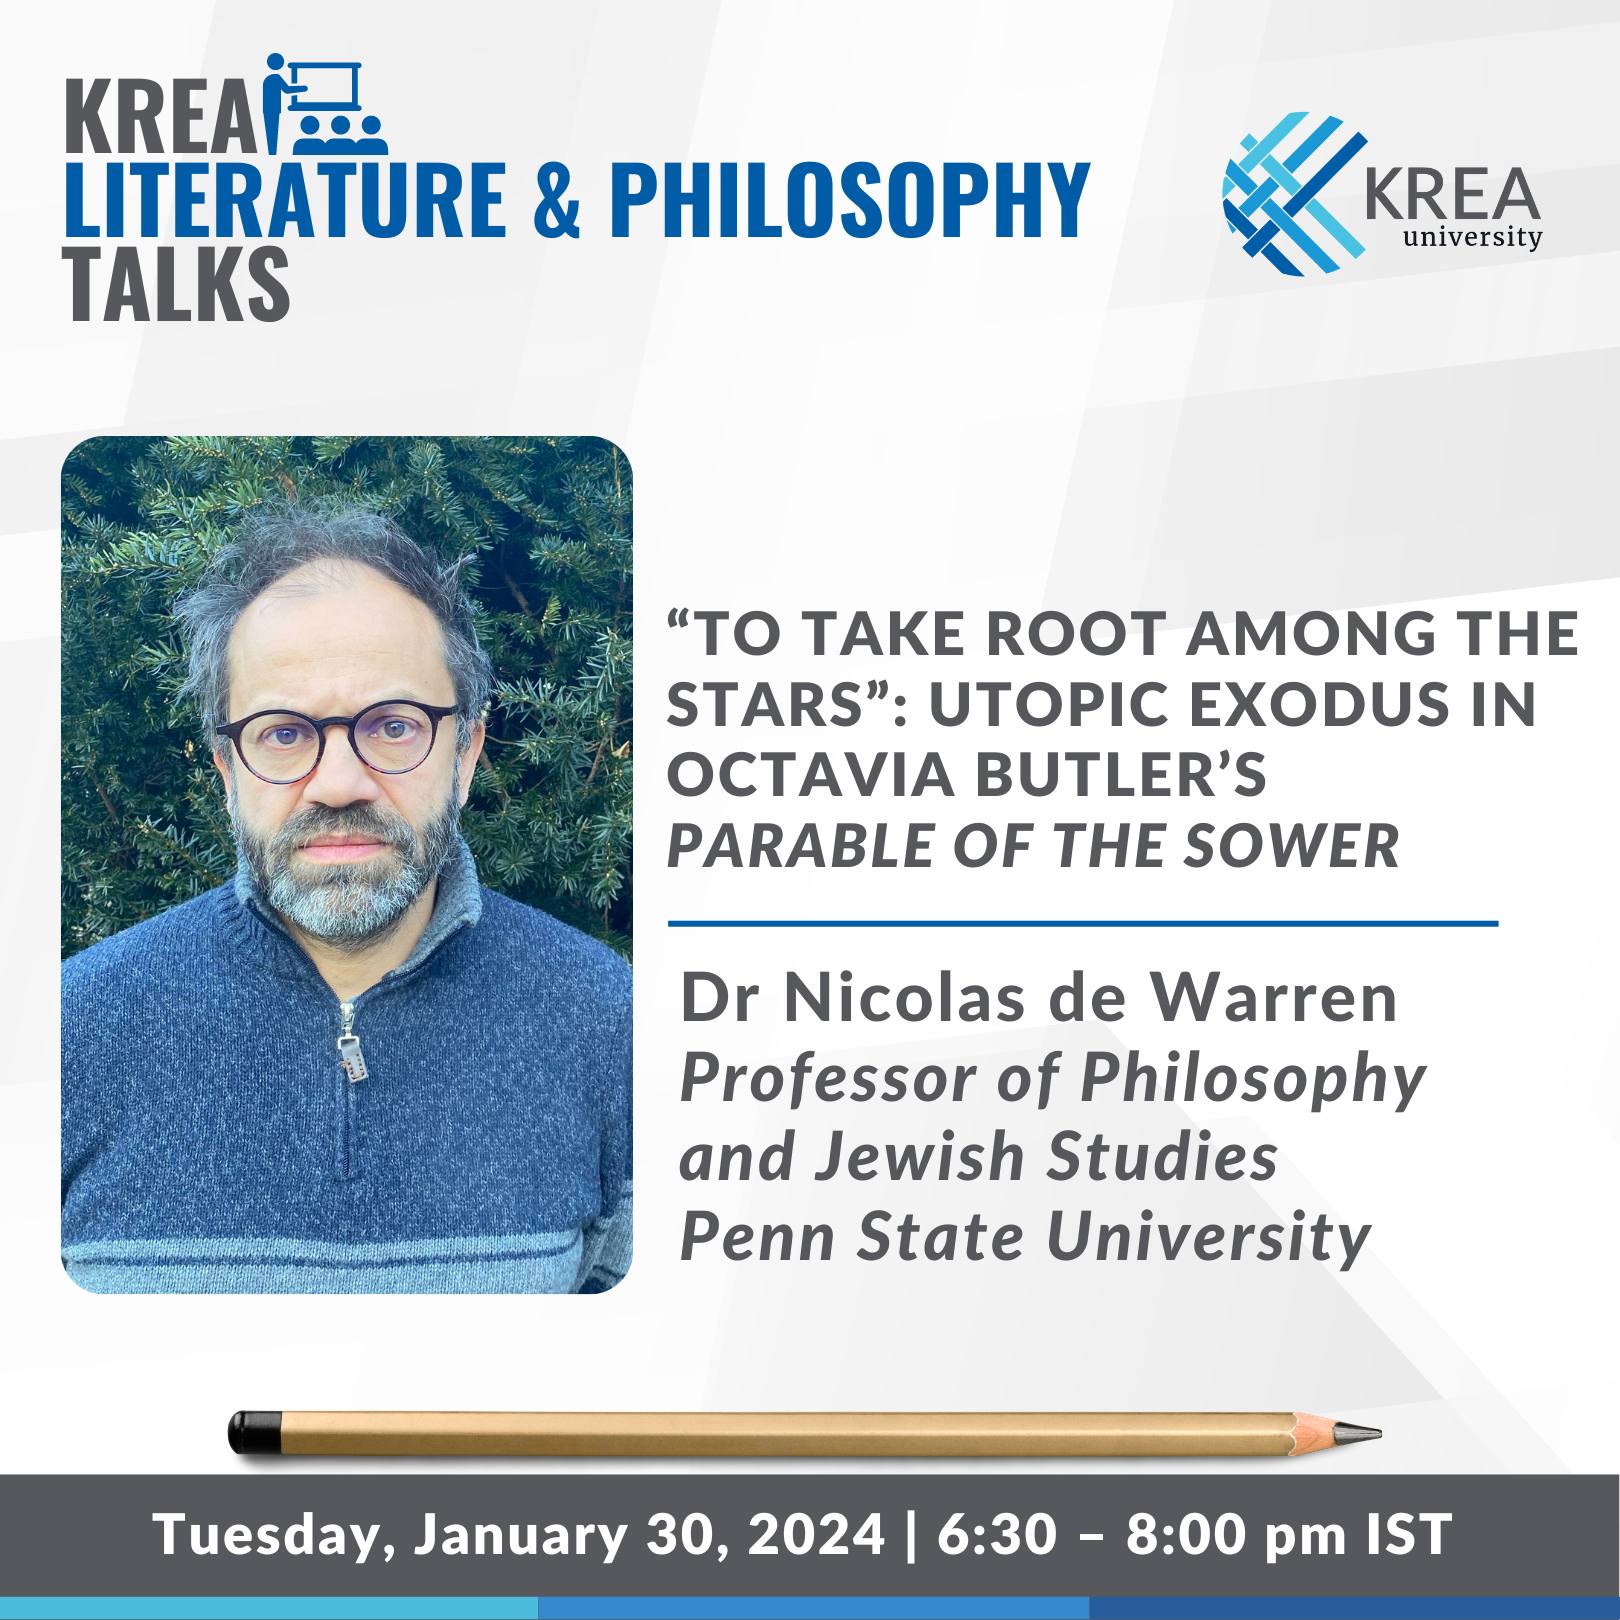 To Take Root Among the Stars: Utopic Exodus in Octavia Butler’s Parable of the Sower – A Talk by Dr Nicolas de Warren